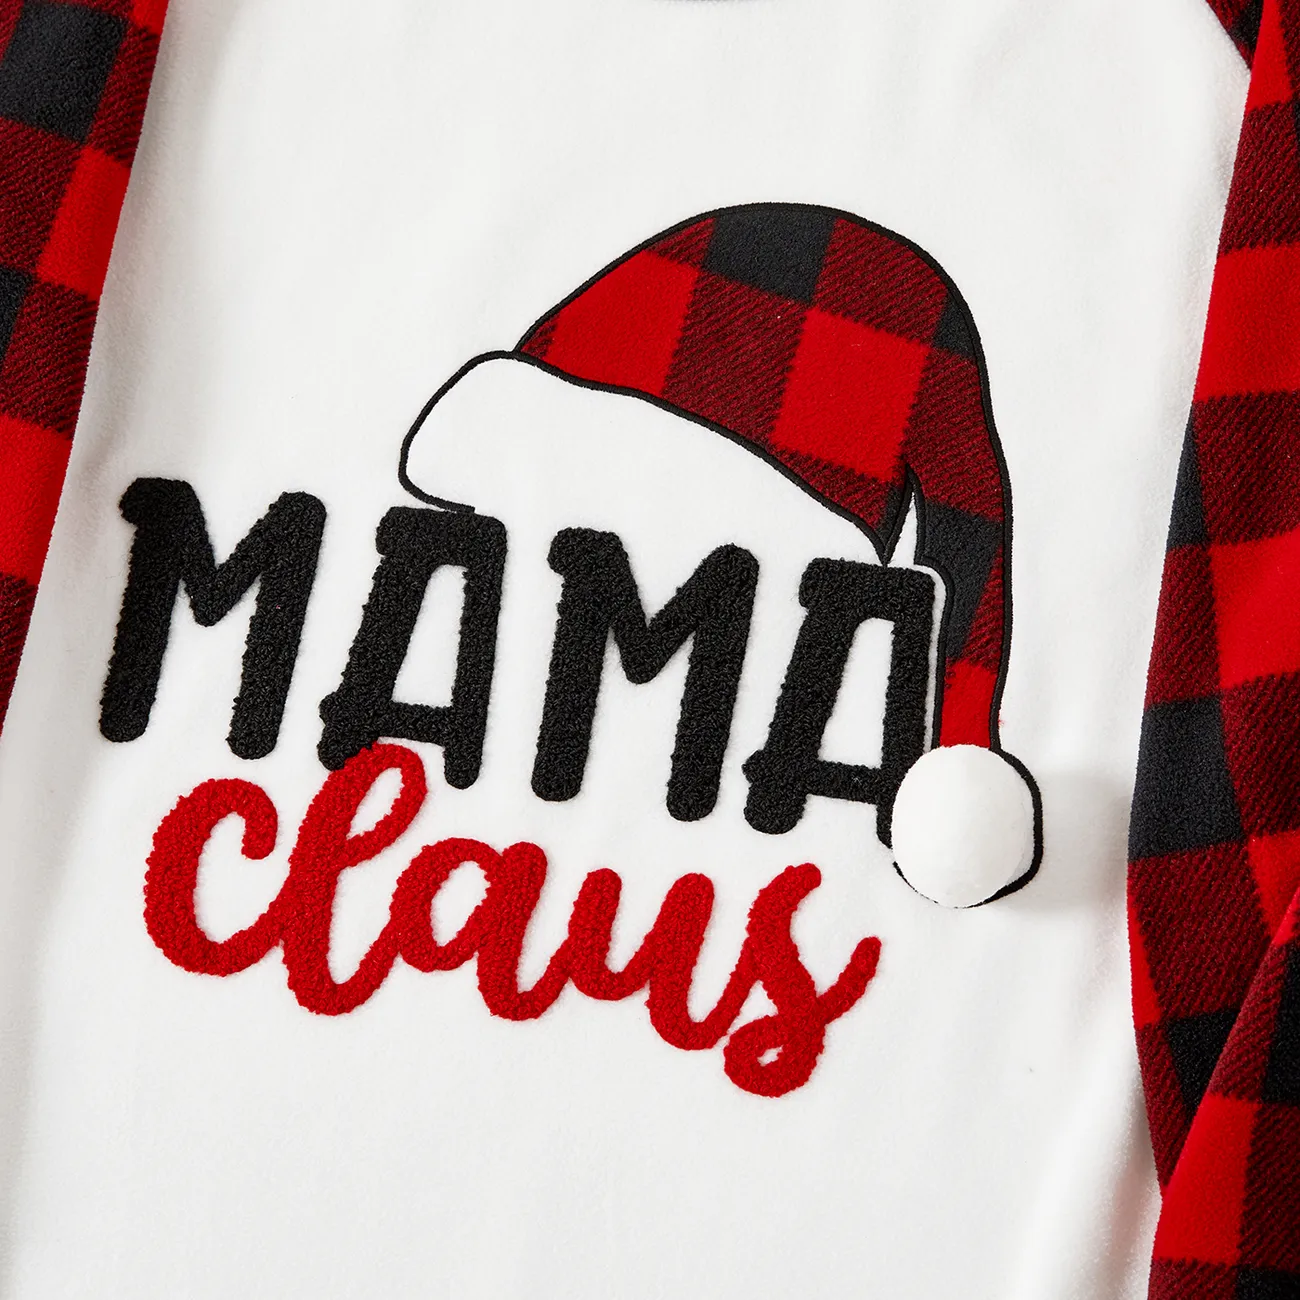 Christmas Family Matching Plaid Letters Embroidered Long-sleeve Pajamas Sets(Flame resistant) Black big image 1